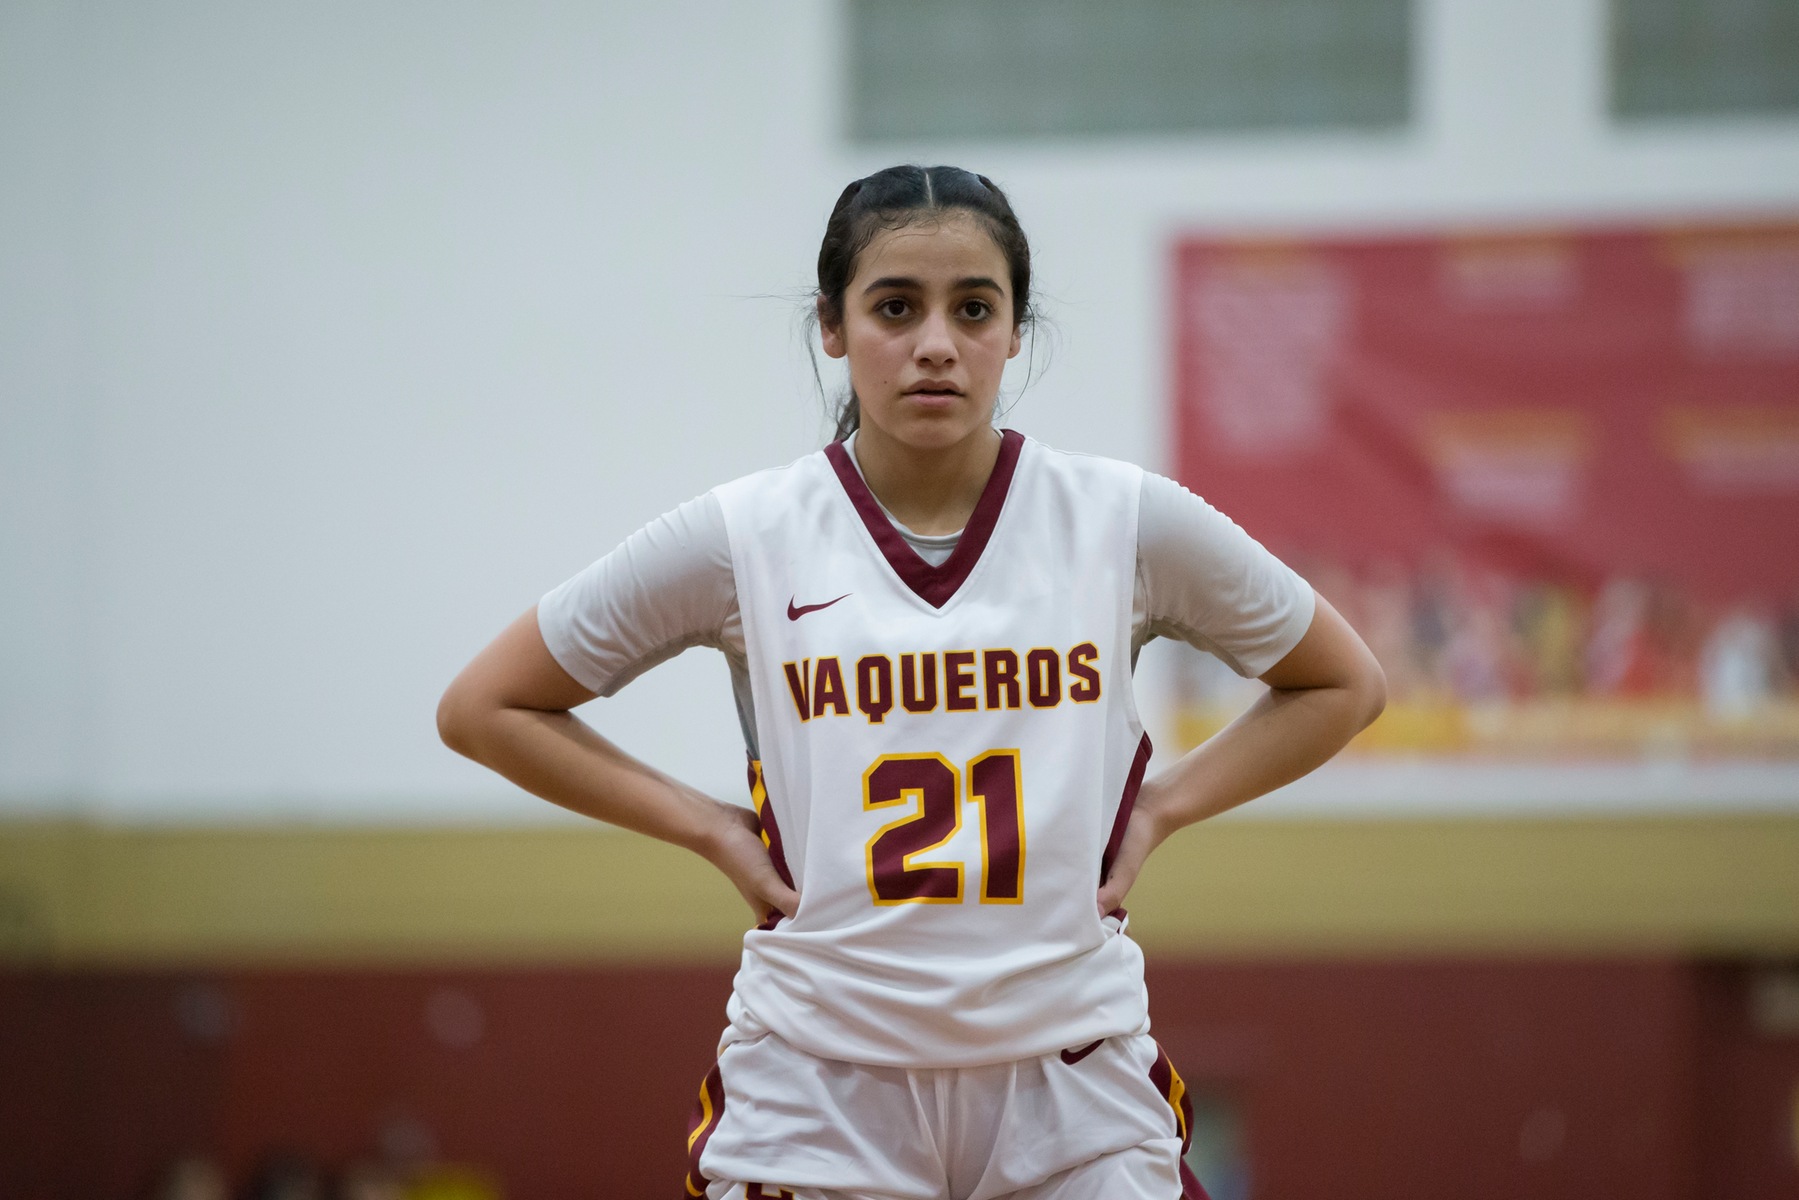 Quick start leads Lady Vaqs to 75-59 win over Rio Hondo for 11th straight victory